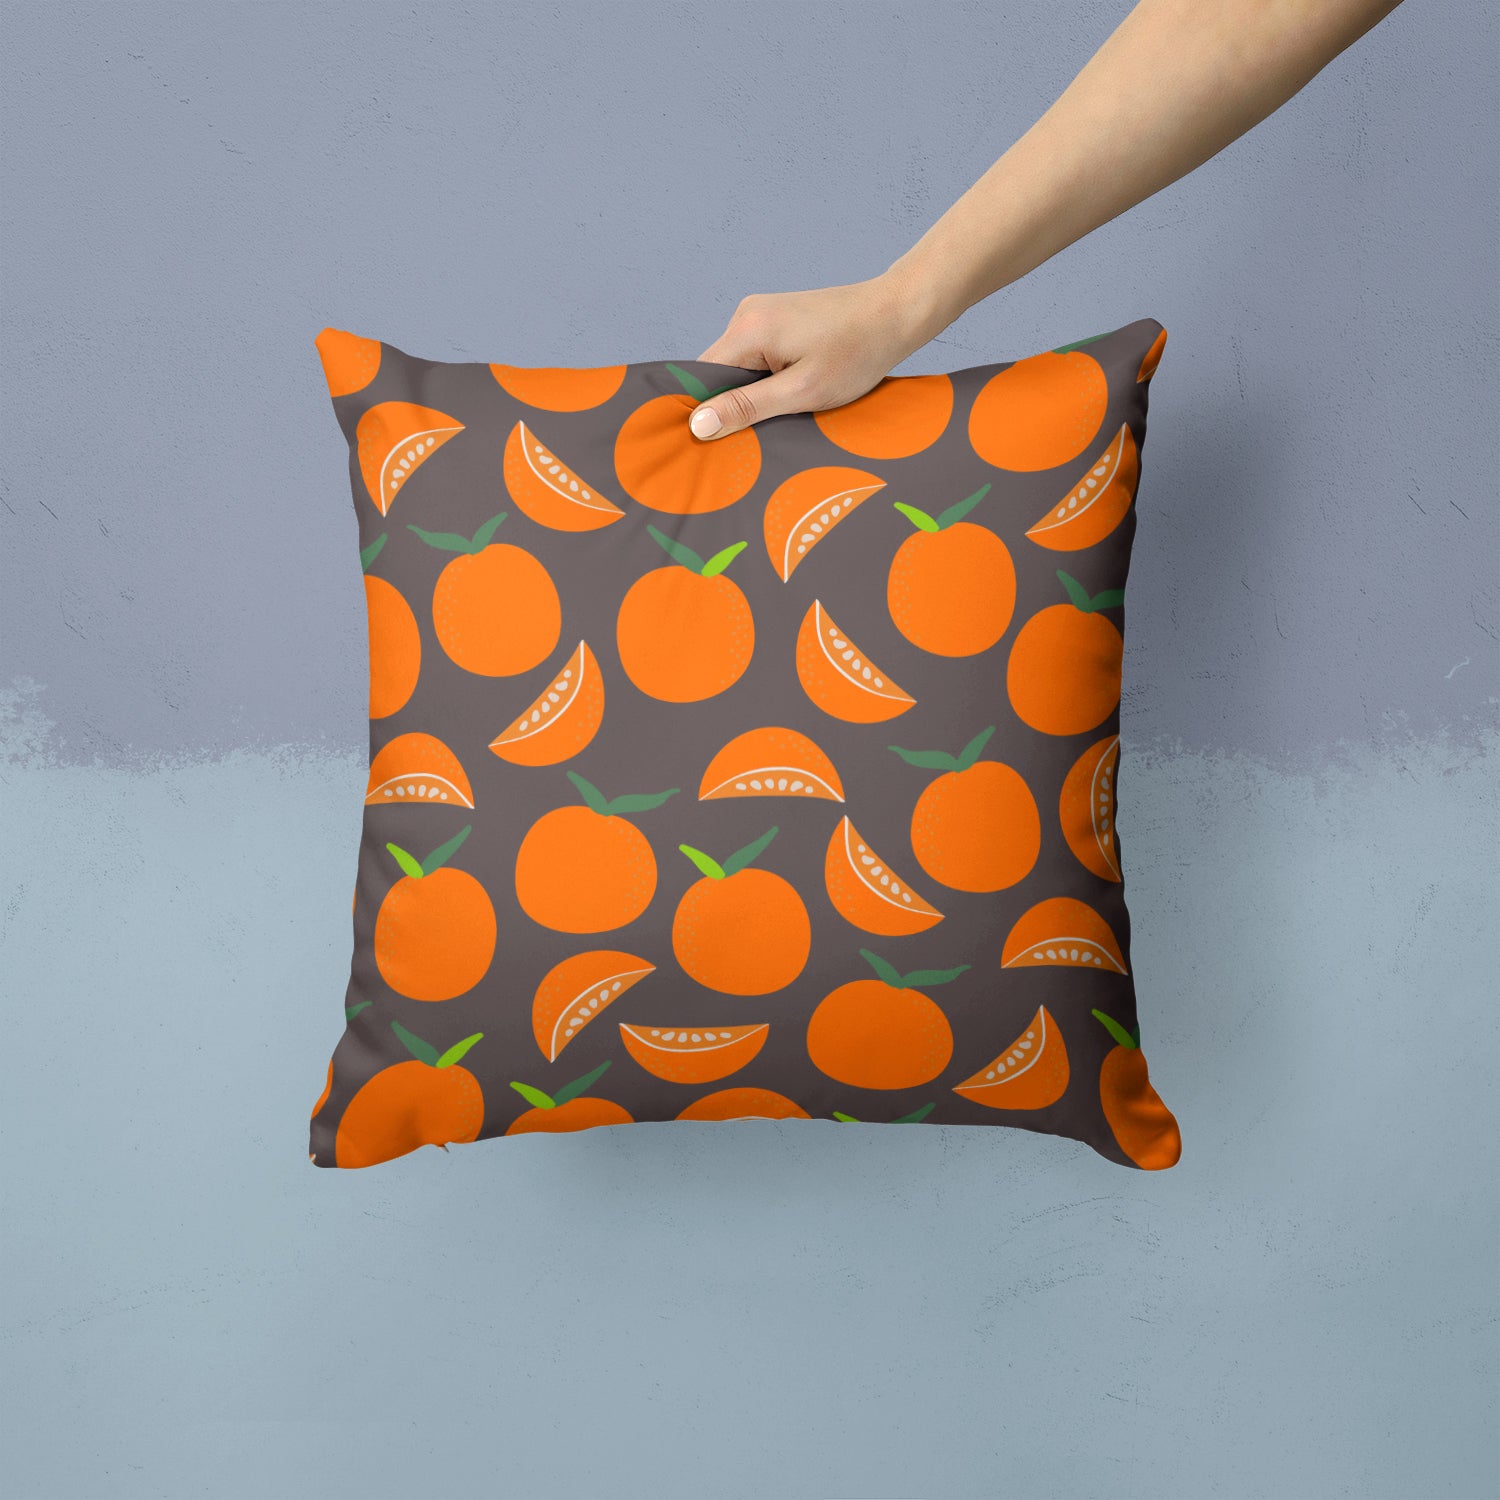 Oranges on Gray Fabric Decorative Pillow BB5142PW1414 - the-store.com